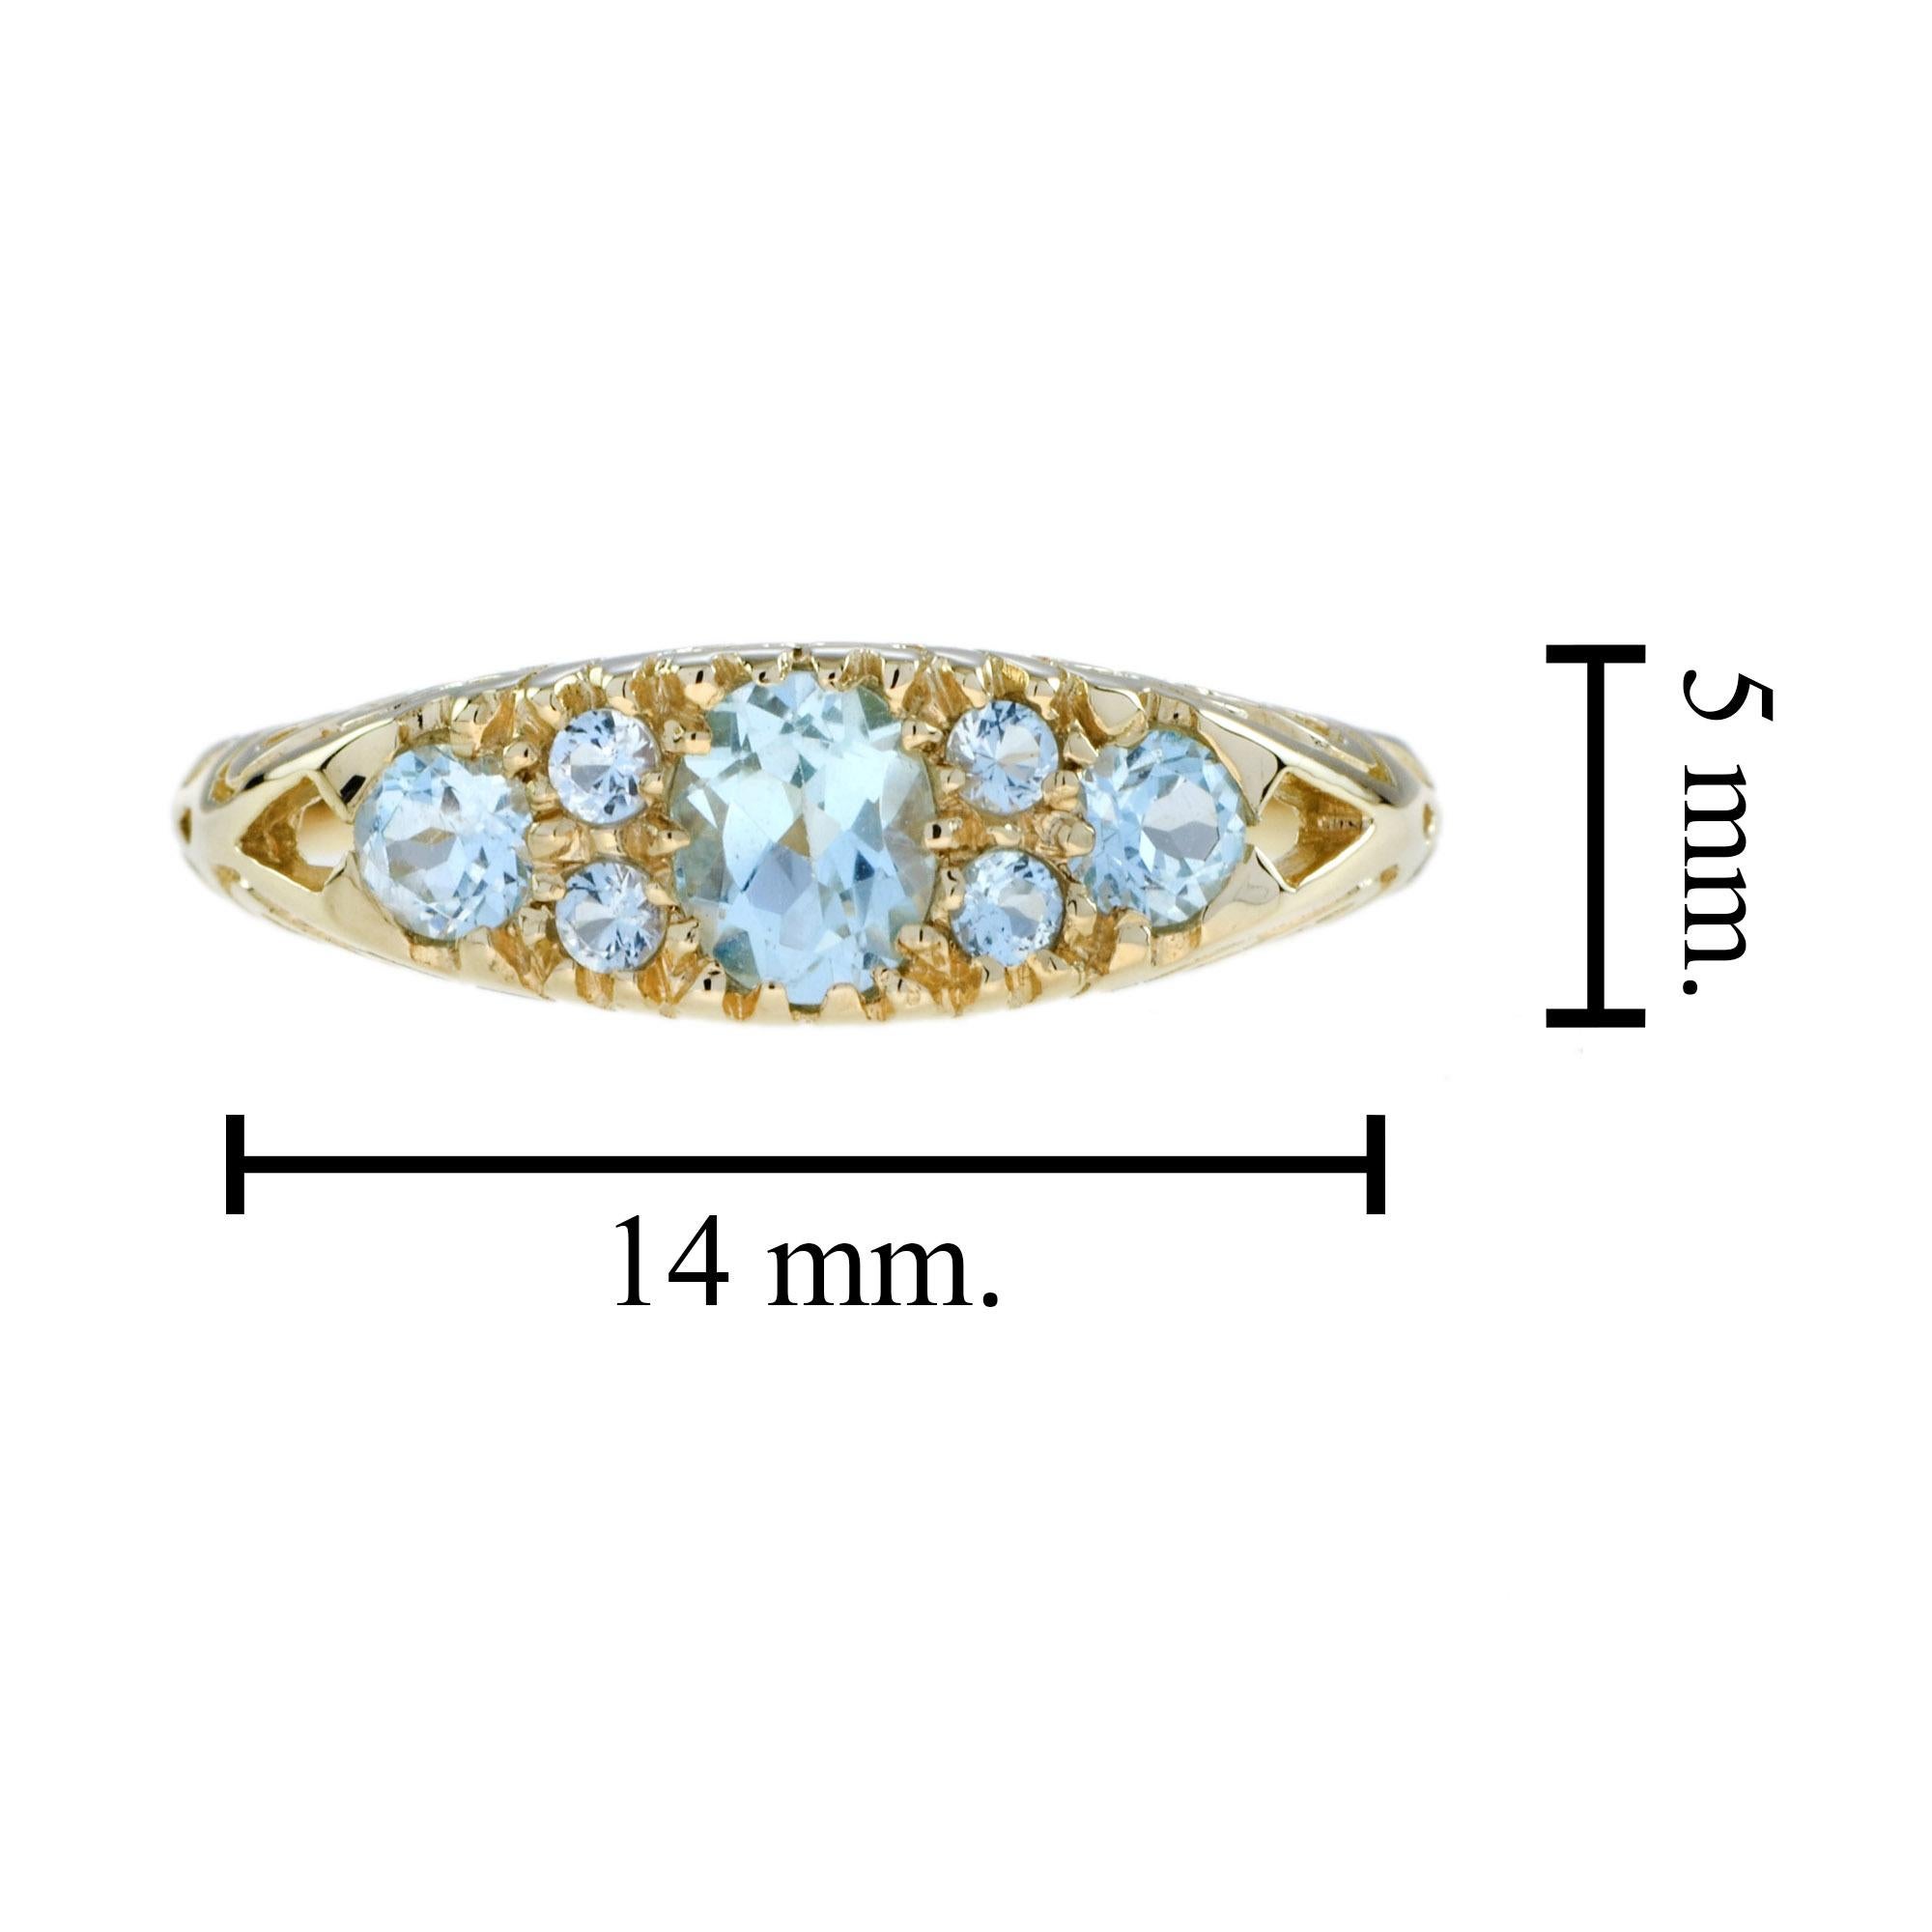 For Sale:  Blue Topaz Vintage Style Three Stone Filigree Ring in 14K Yellow Gold 6